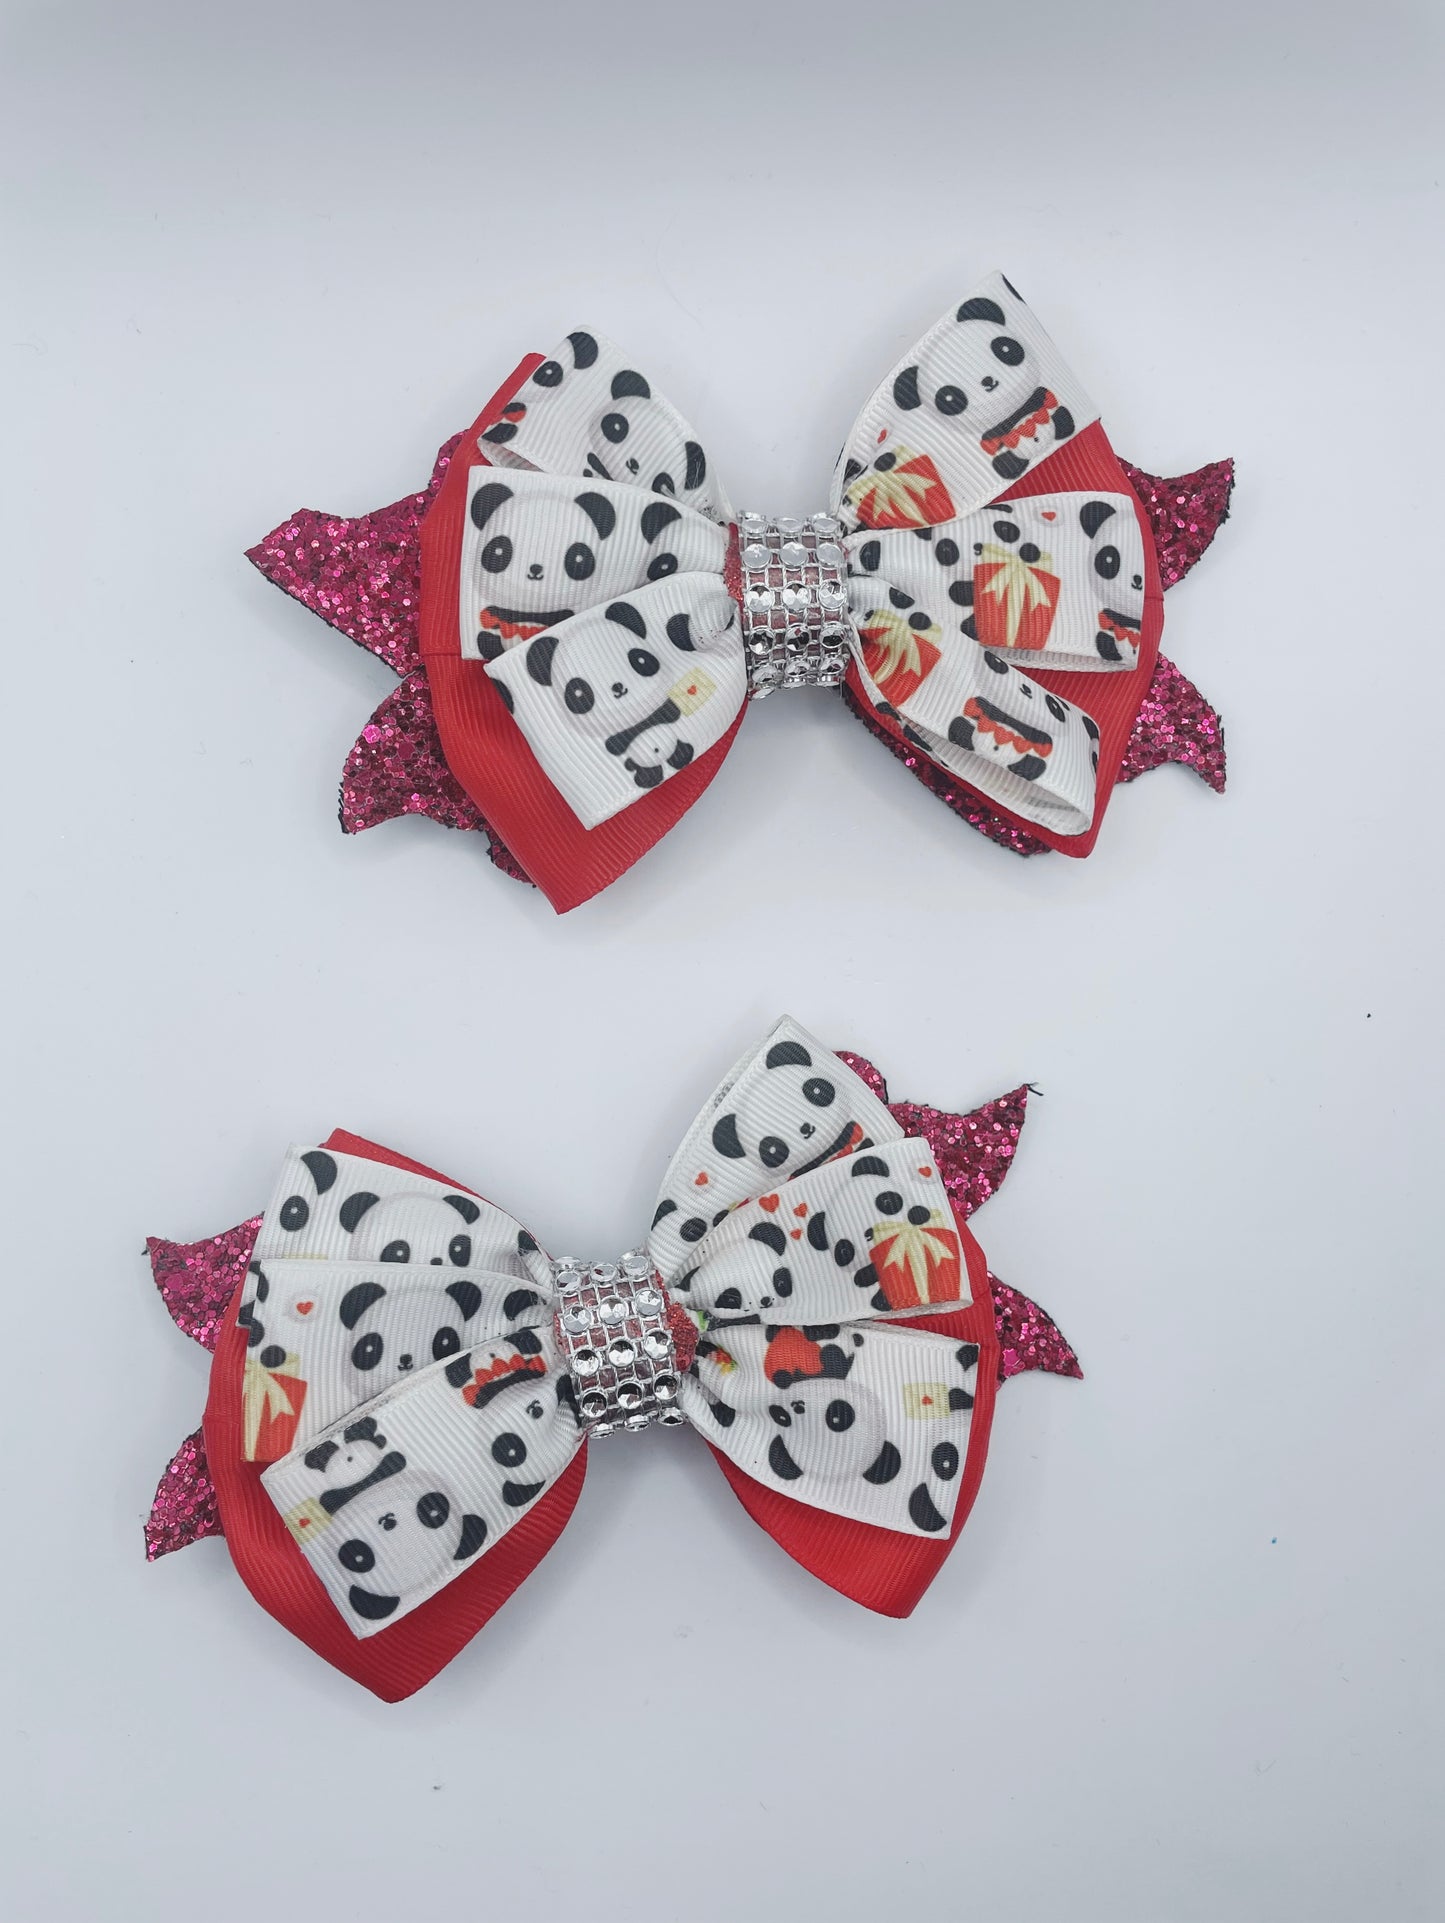 Pair of Bows for Infants Toddlers Kids Teens Alligator Hair Clips for Girls Boutique Grossgrain Ribbons Pair of Bows Hair Clips for Girls Handmade Girl Pair of Bows